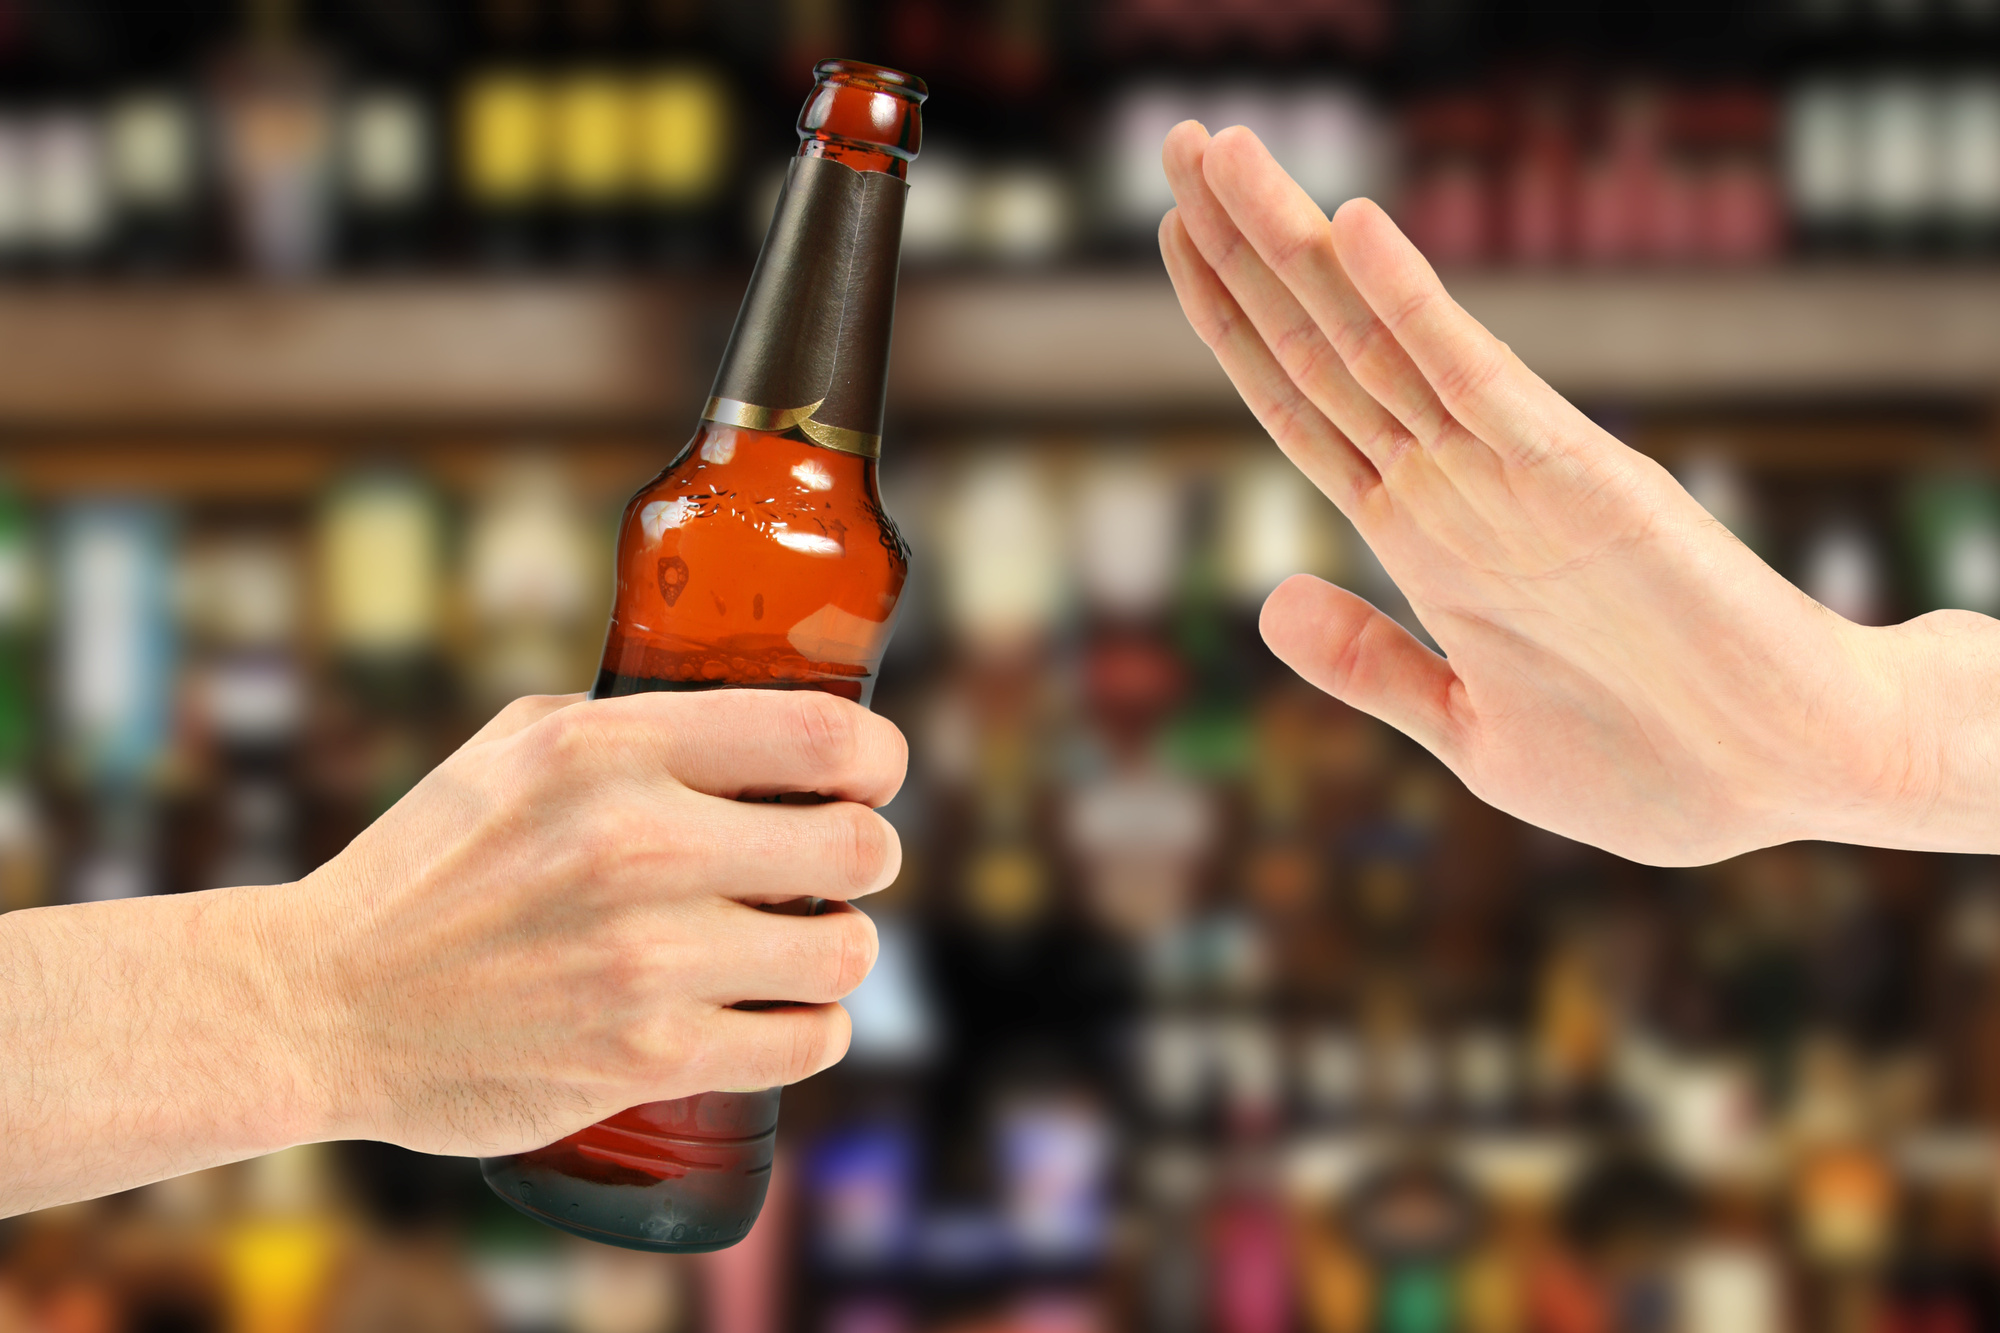 Whether you have an alcohol problem or you're just worried about the impact drinking has on your health and life, here are four reasons to quit drinking.